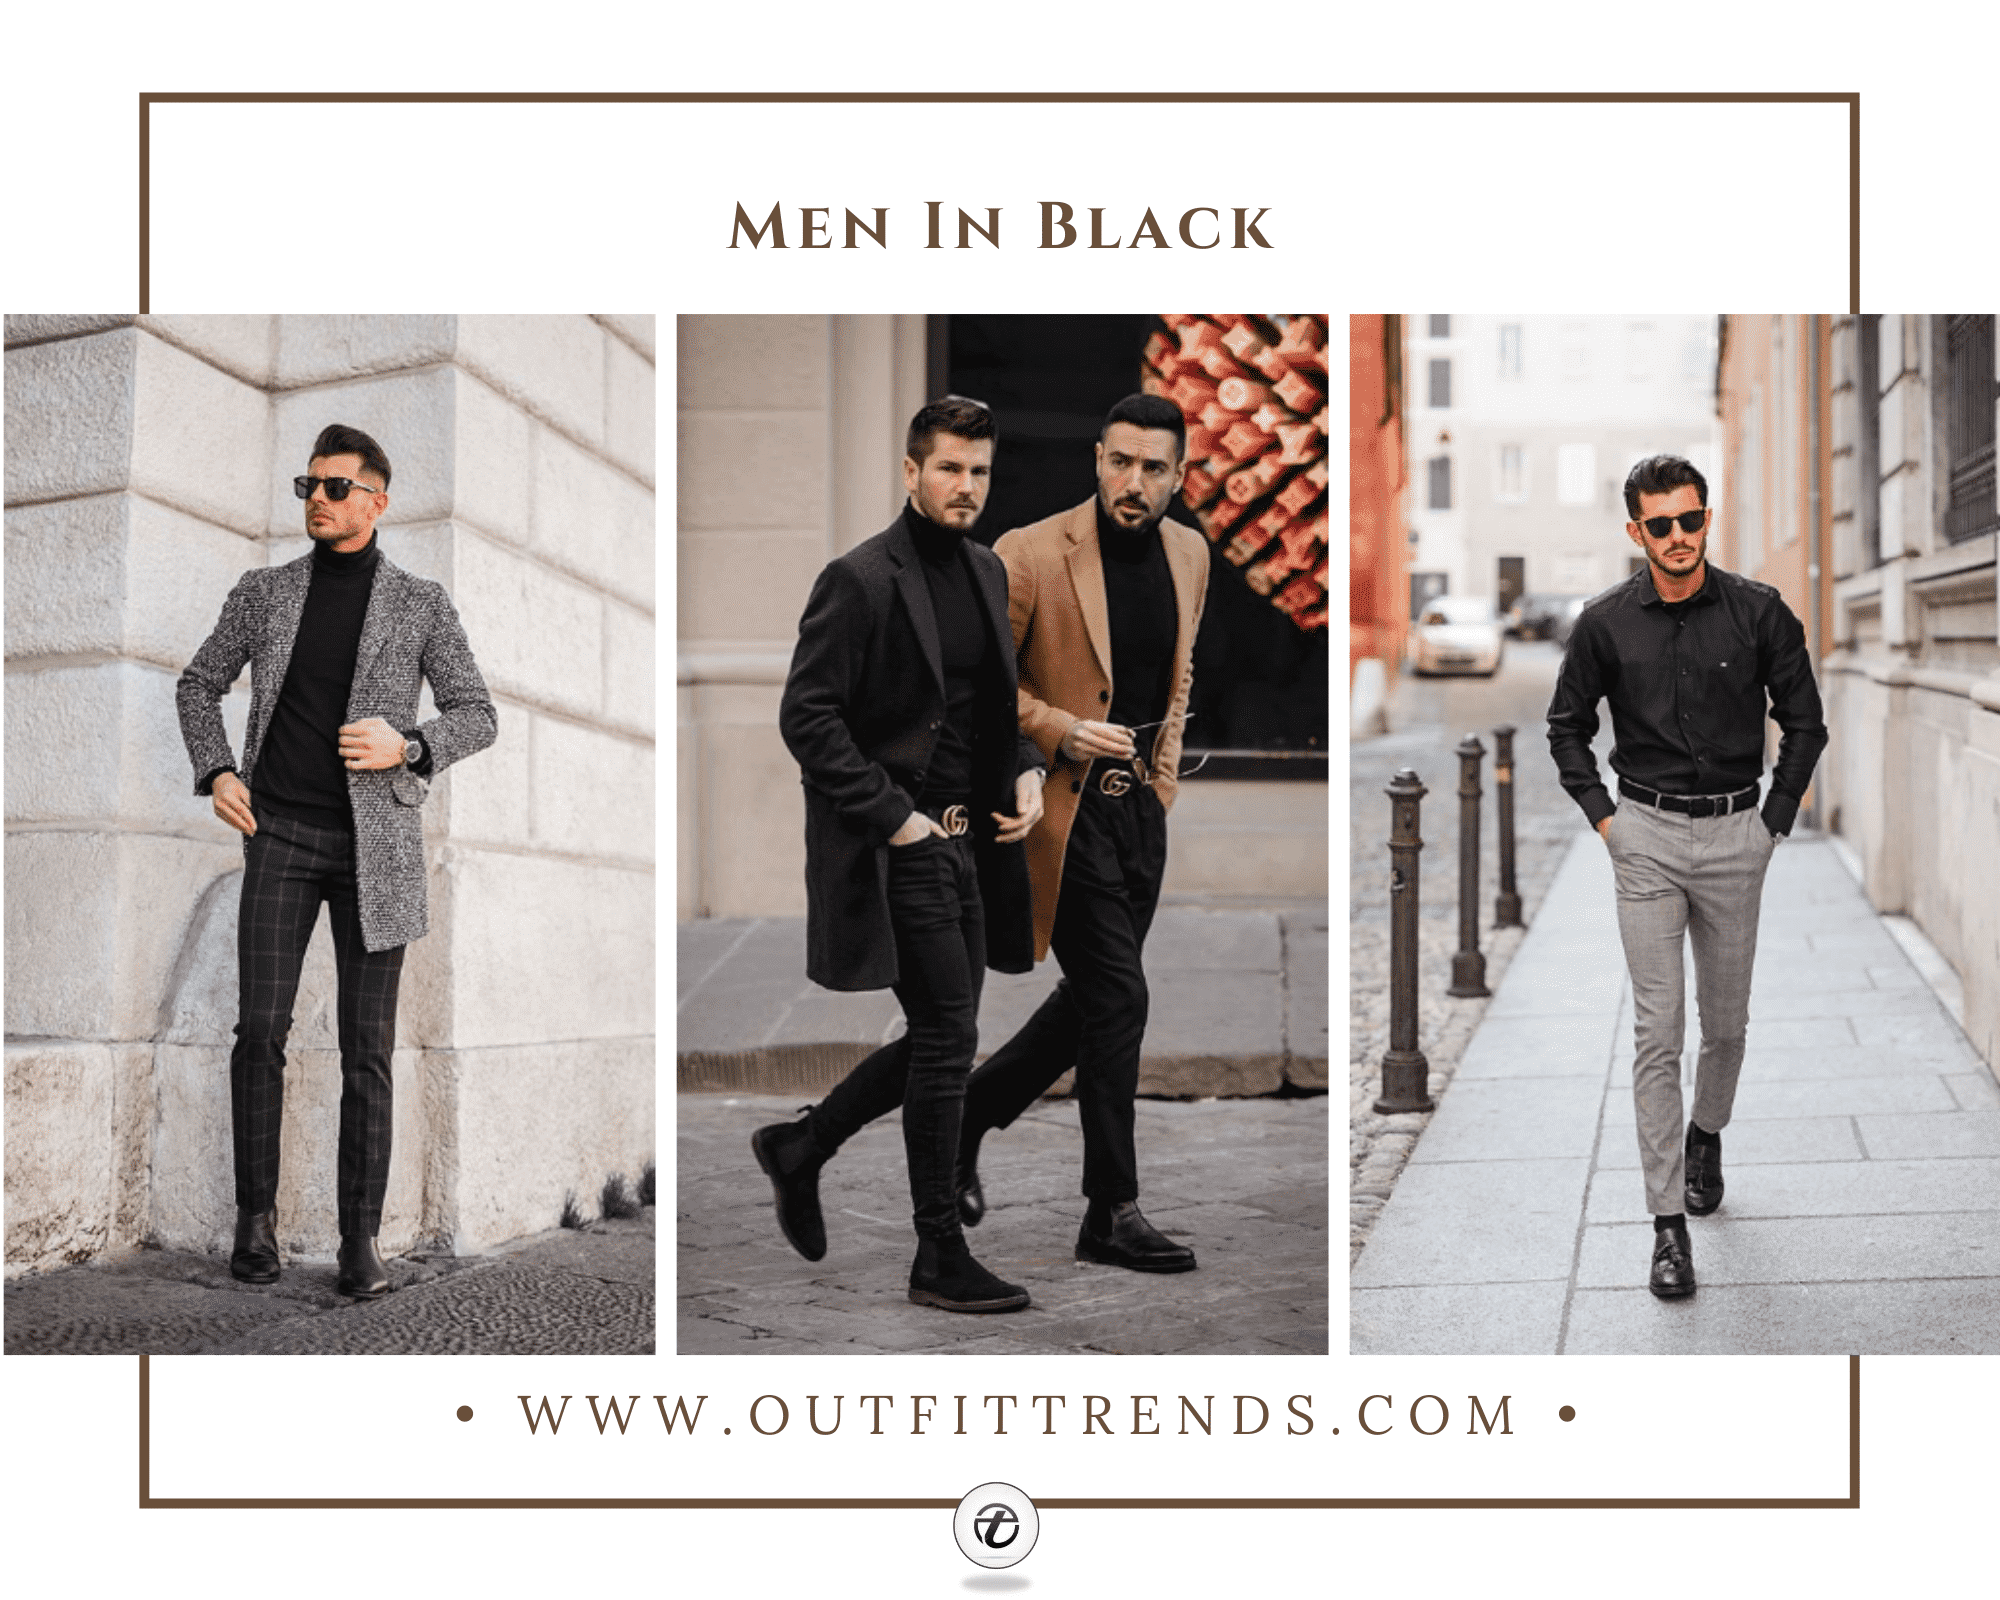 10+ Black Shirt Combination Ideas For Men In 2022